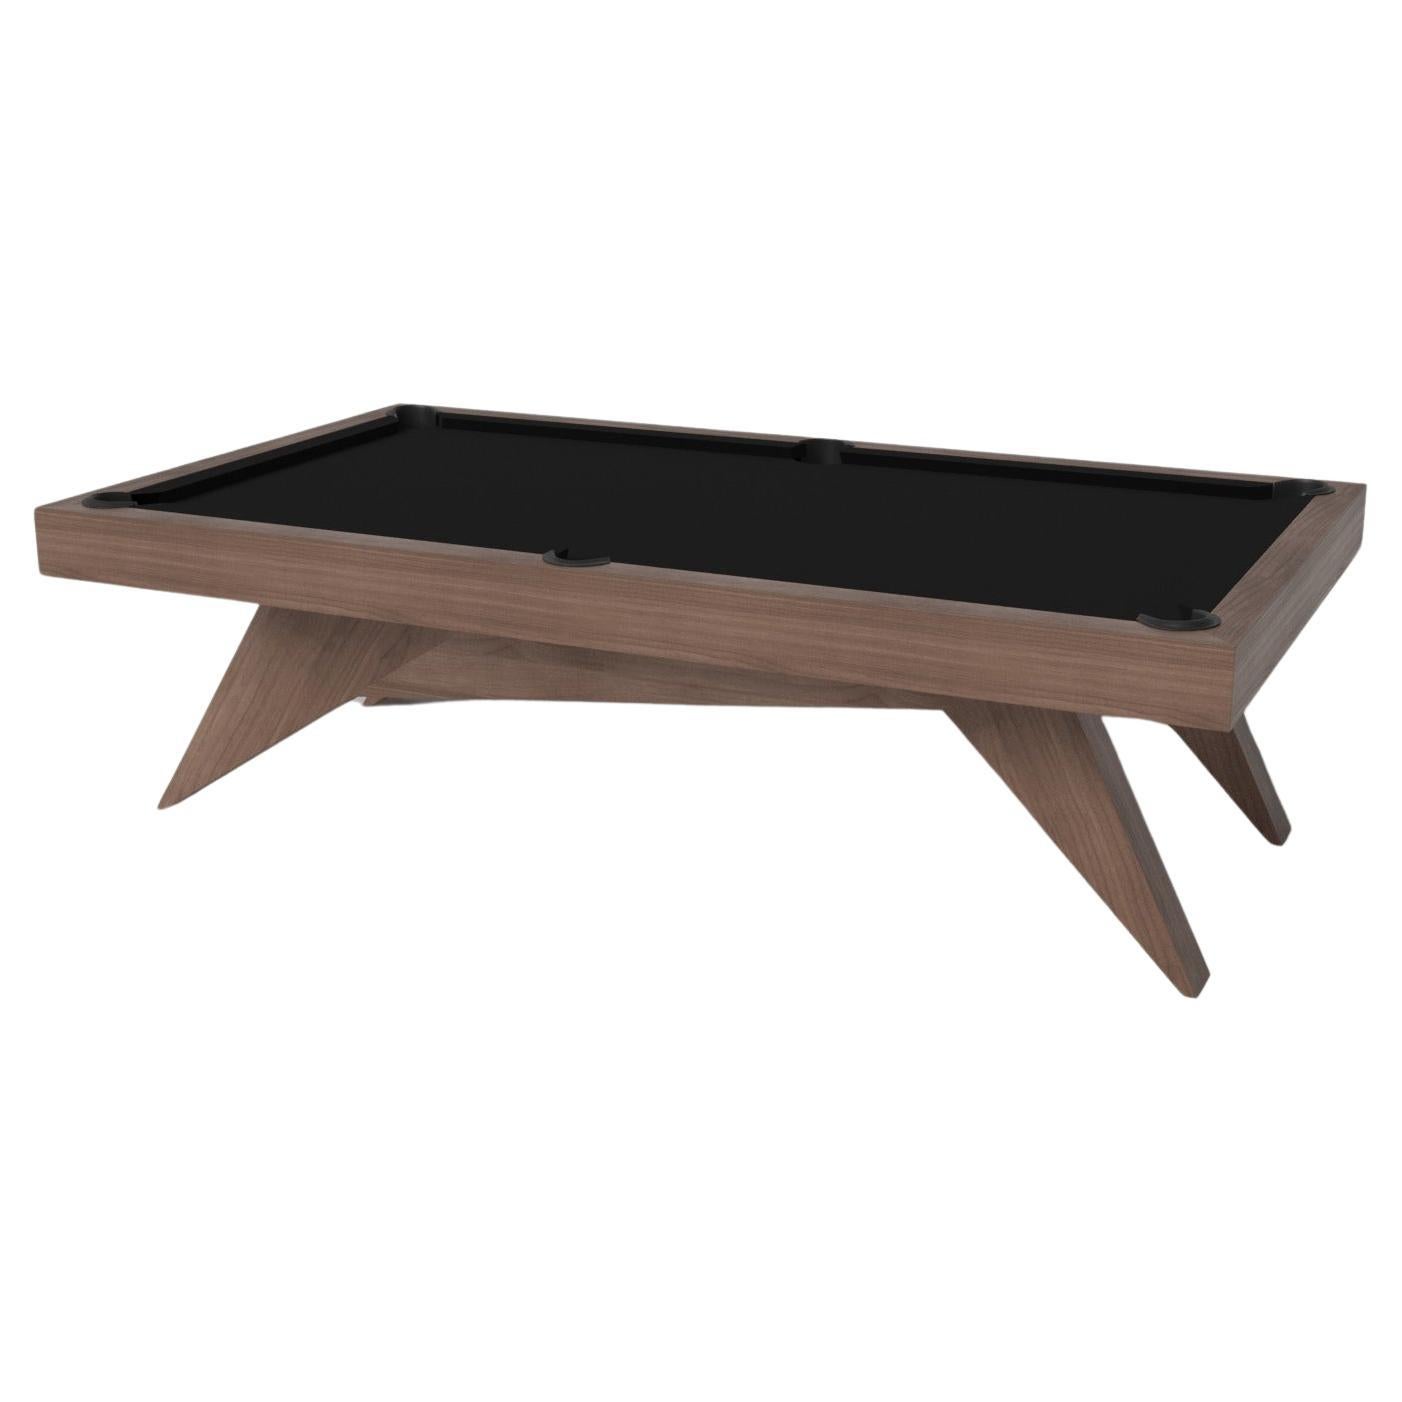 Elevate Customs Mantis Pool Table / Solid Walnut Wood in 8.5' - Made in USA For Sale